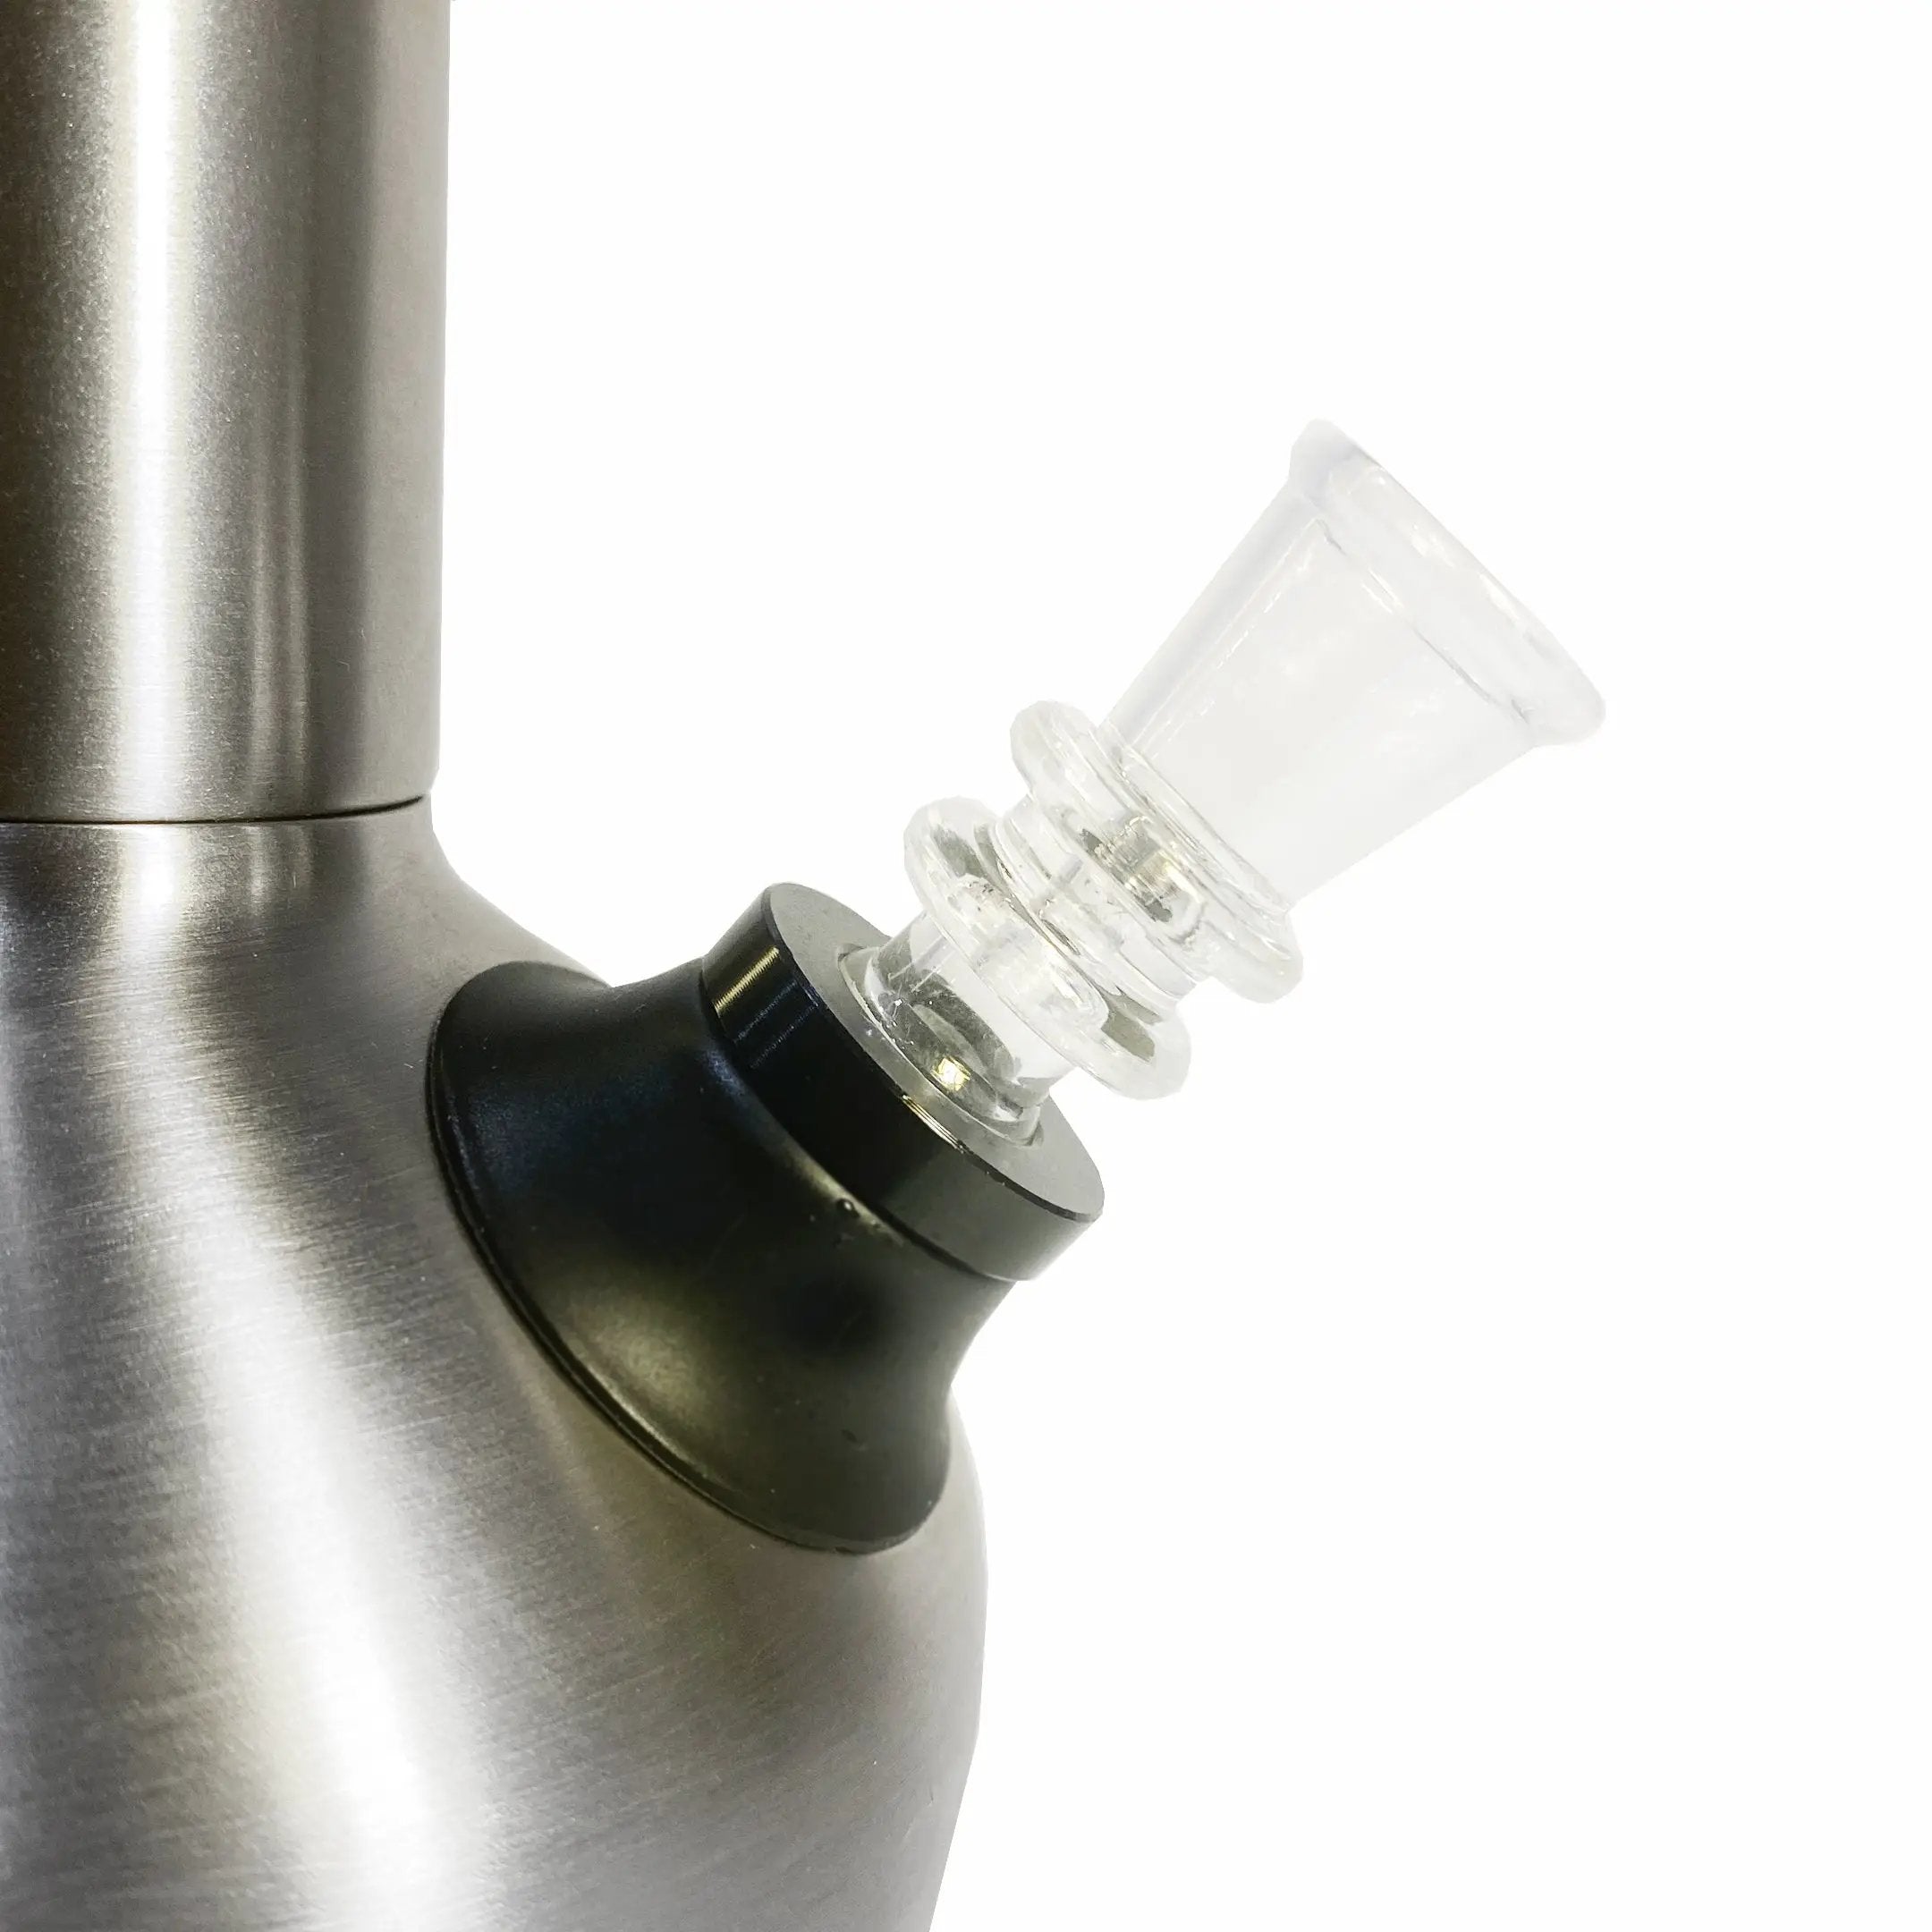 Chill - Borosilicate Glass Slide by Chill Steel Pipes